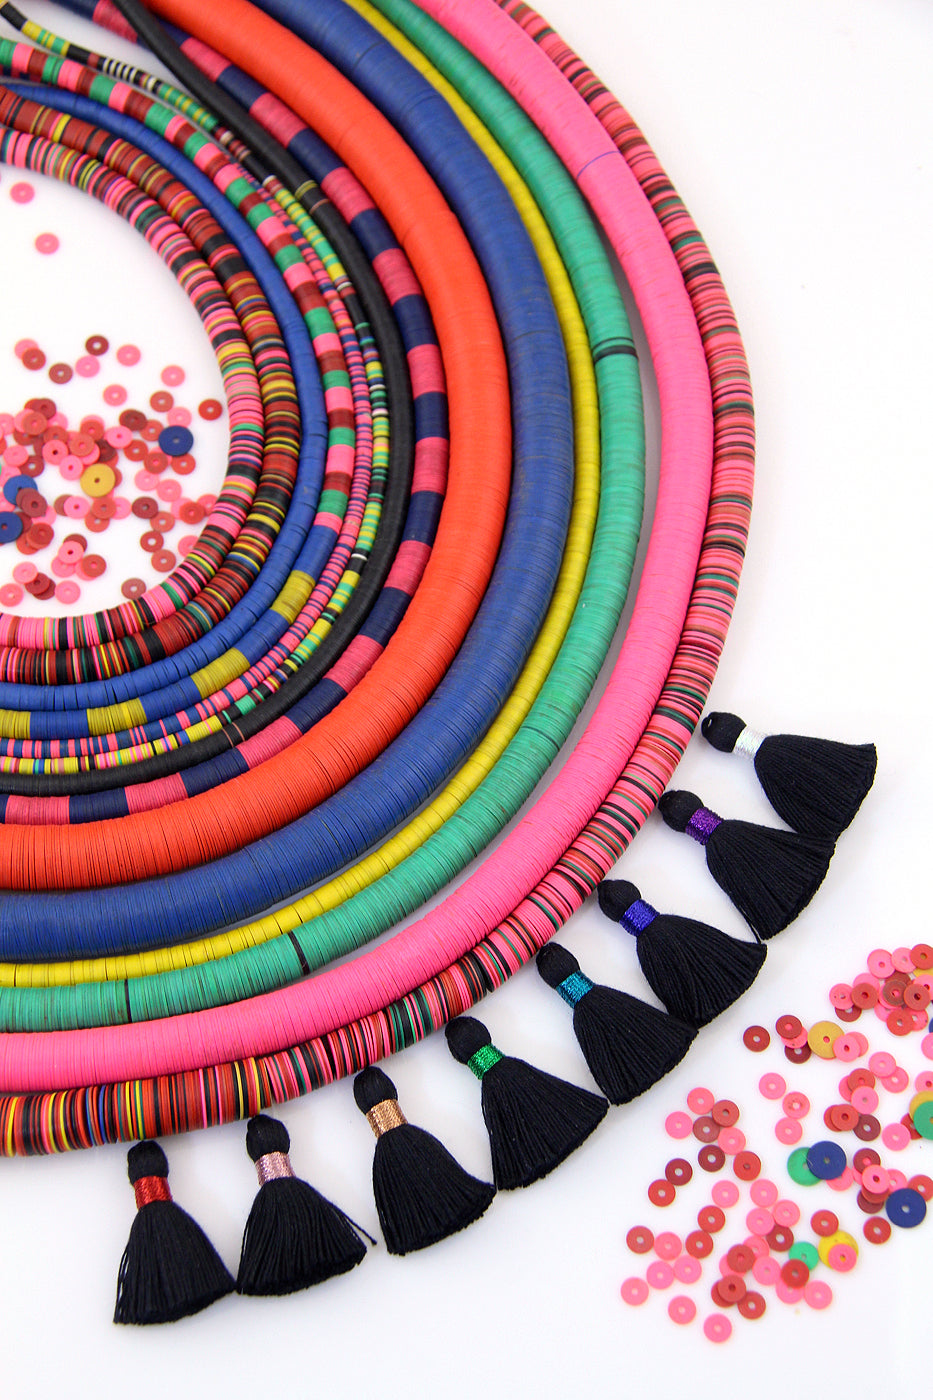 Vintage African Vinyl Record Beads, Assorted Sizes & Colors 4-14mm, Boho Tribal Necklace